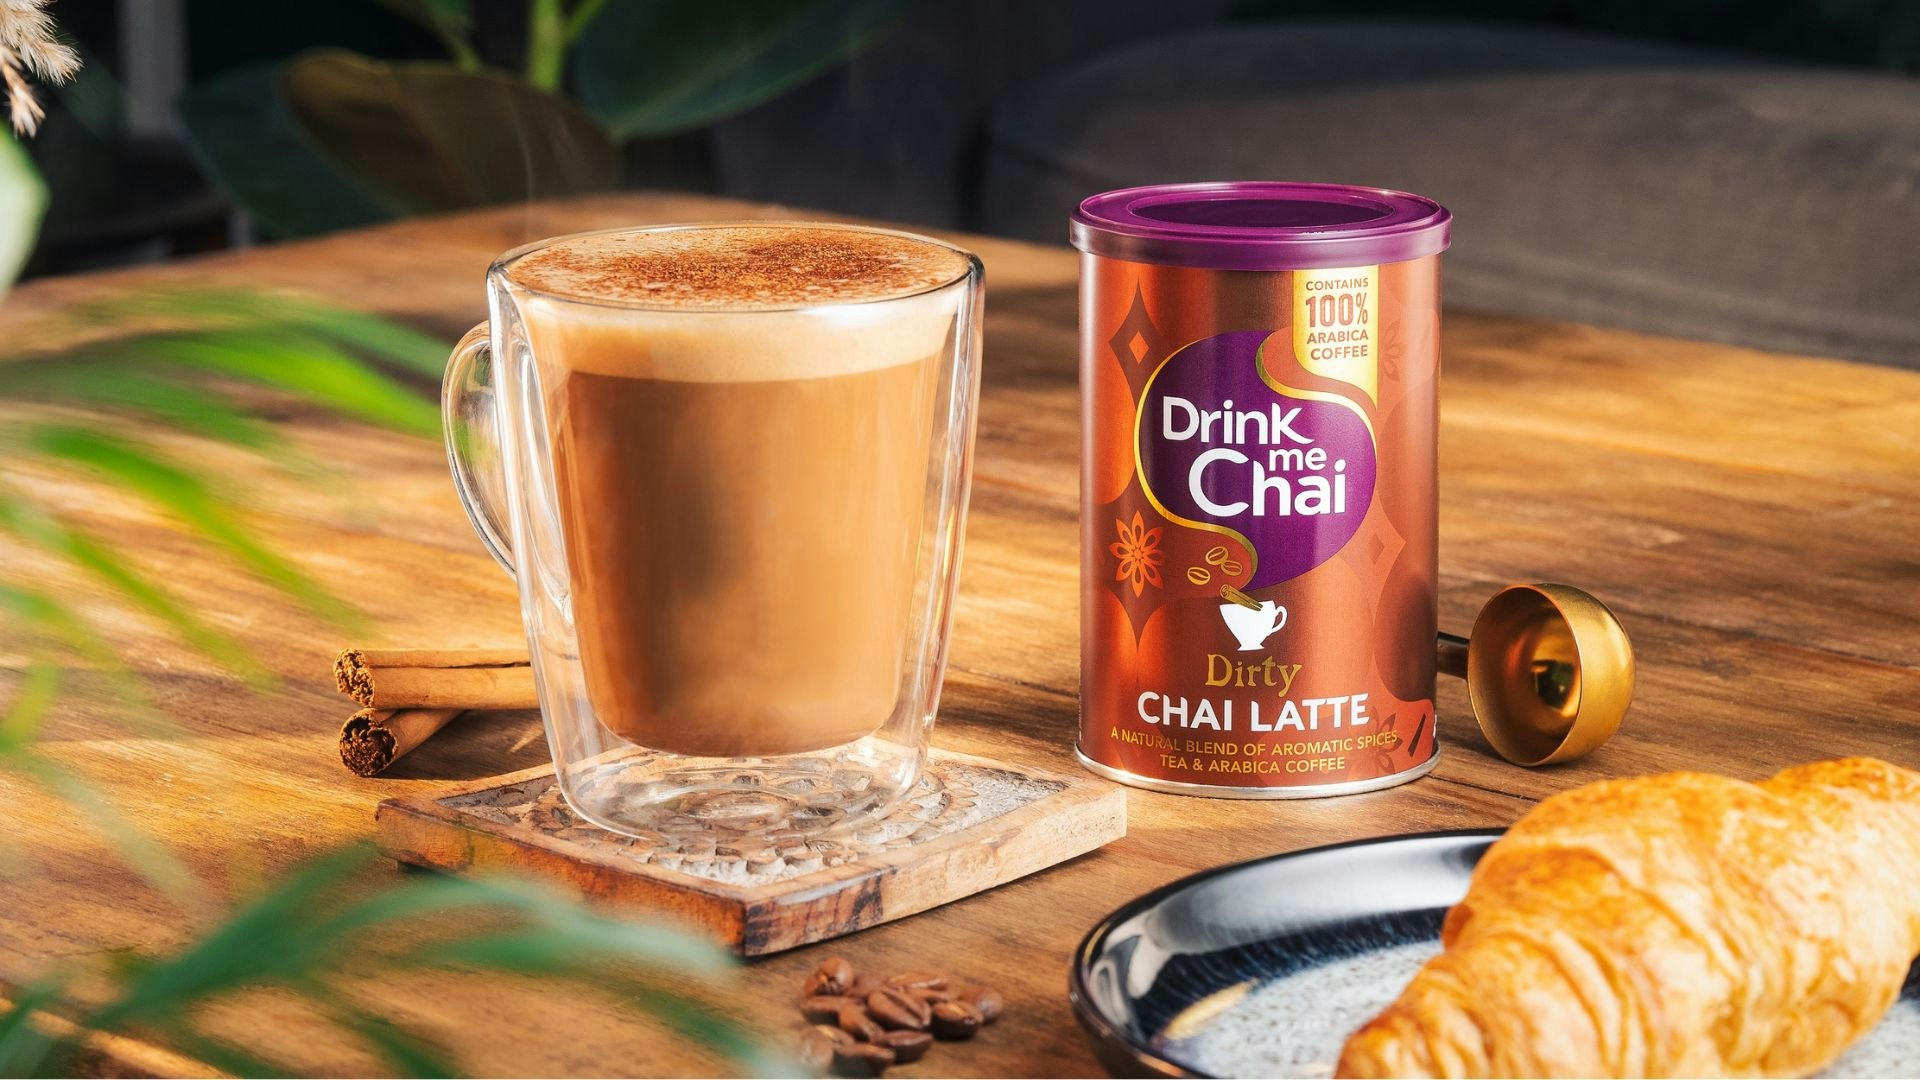 Win a bundle of Drink me Chai’s bestselling Chai Lattes